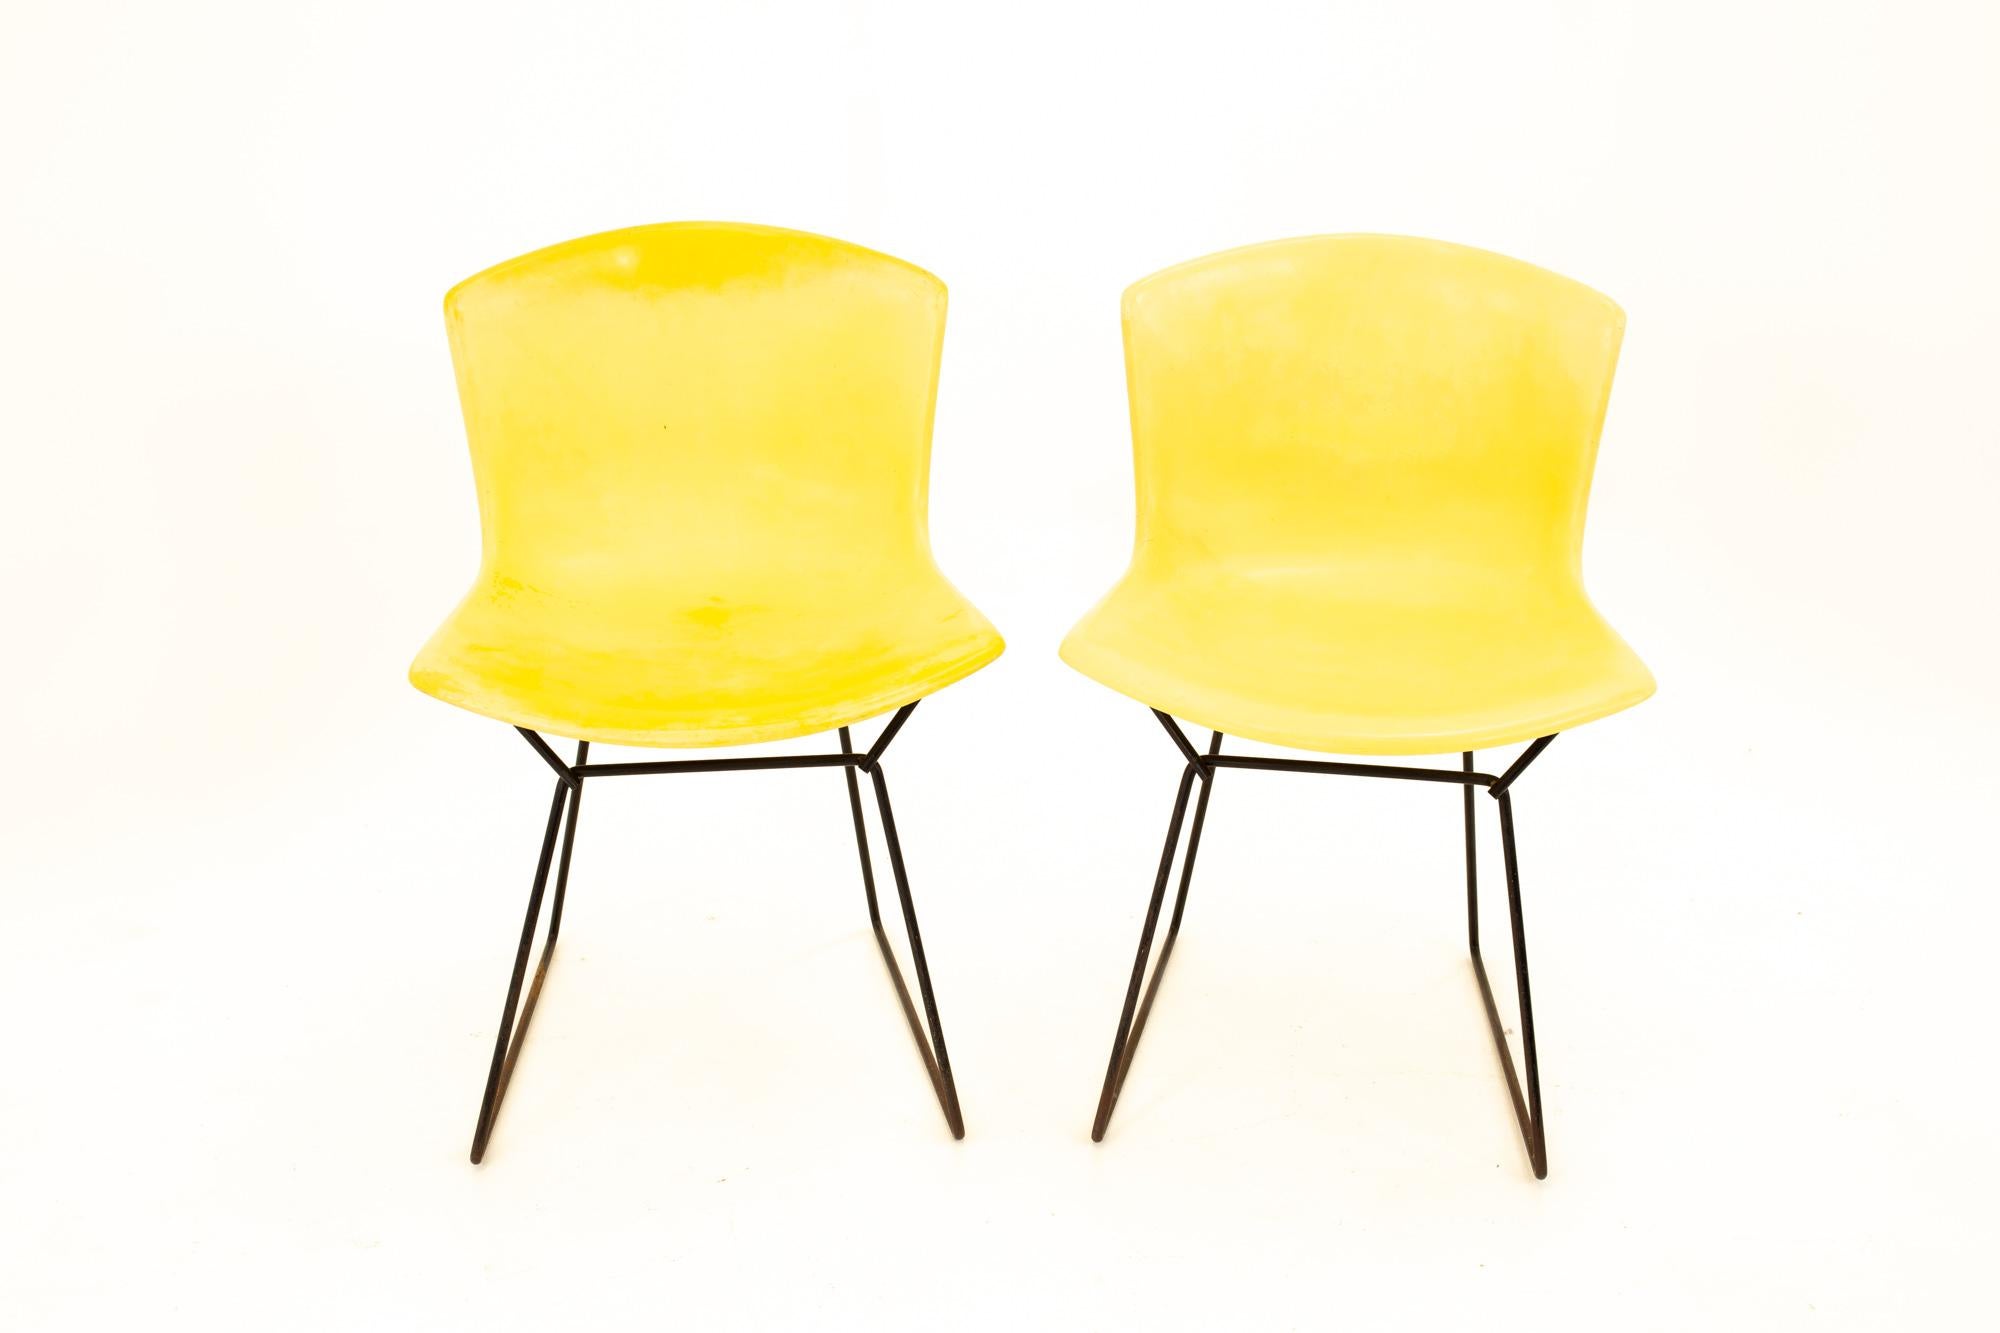 Knoll mid century yellow fiberglass side chair - pair
Each chair measures: 21 wide x 21.25 deep x 30.25 high with a seat height of 19 inches
This set is available in what we call restored vintage condition. Upon purchase, it is thoroughly cleaned